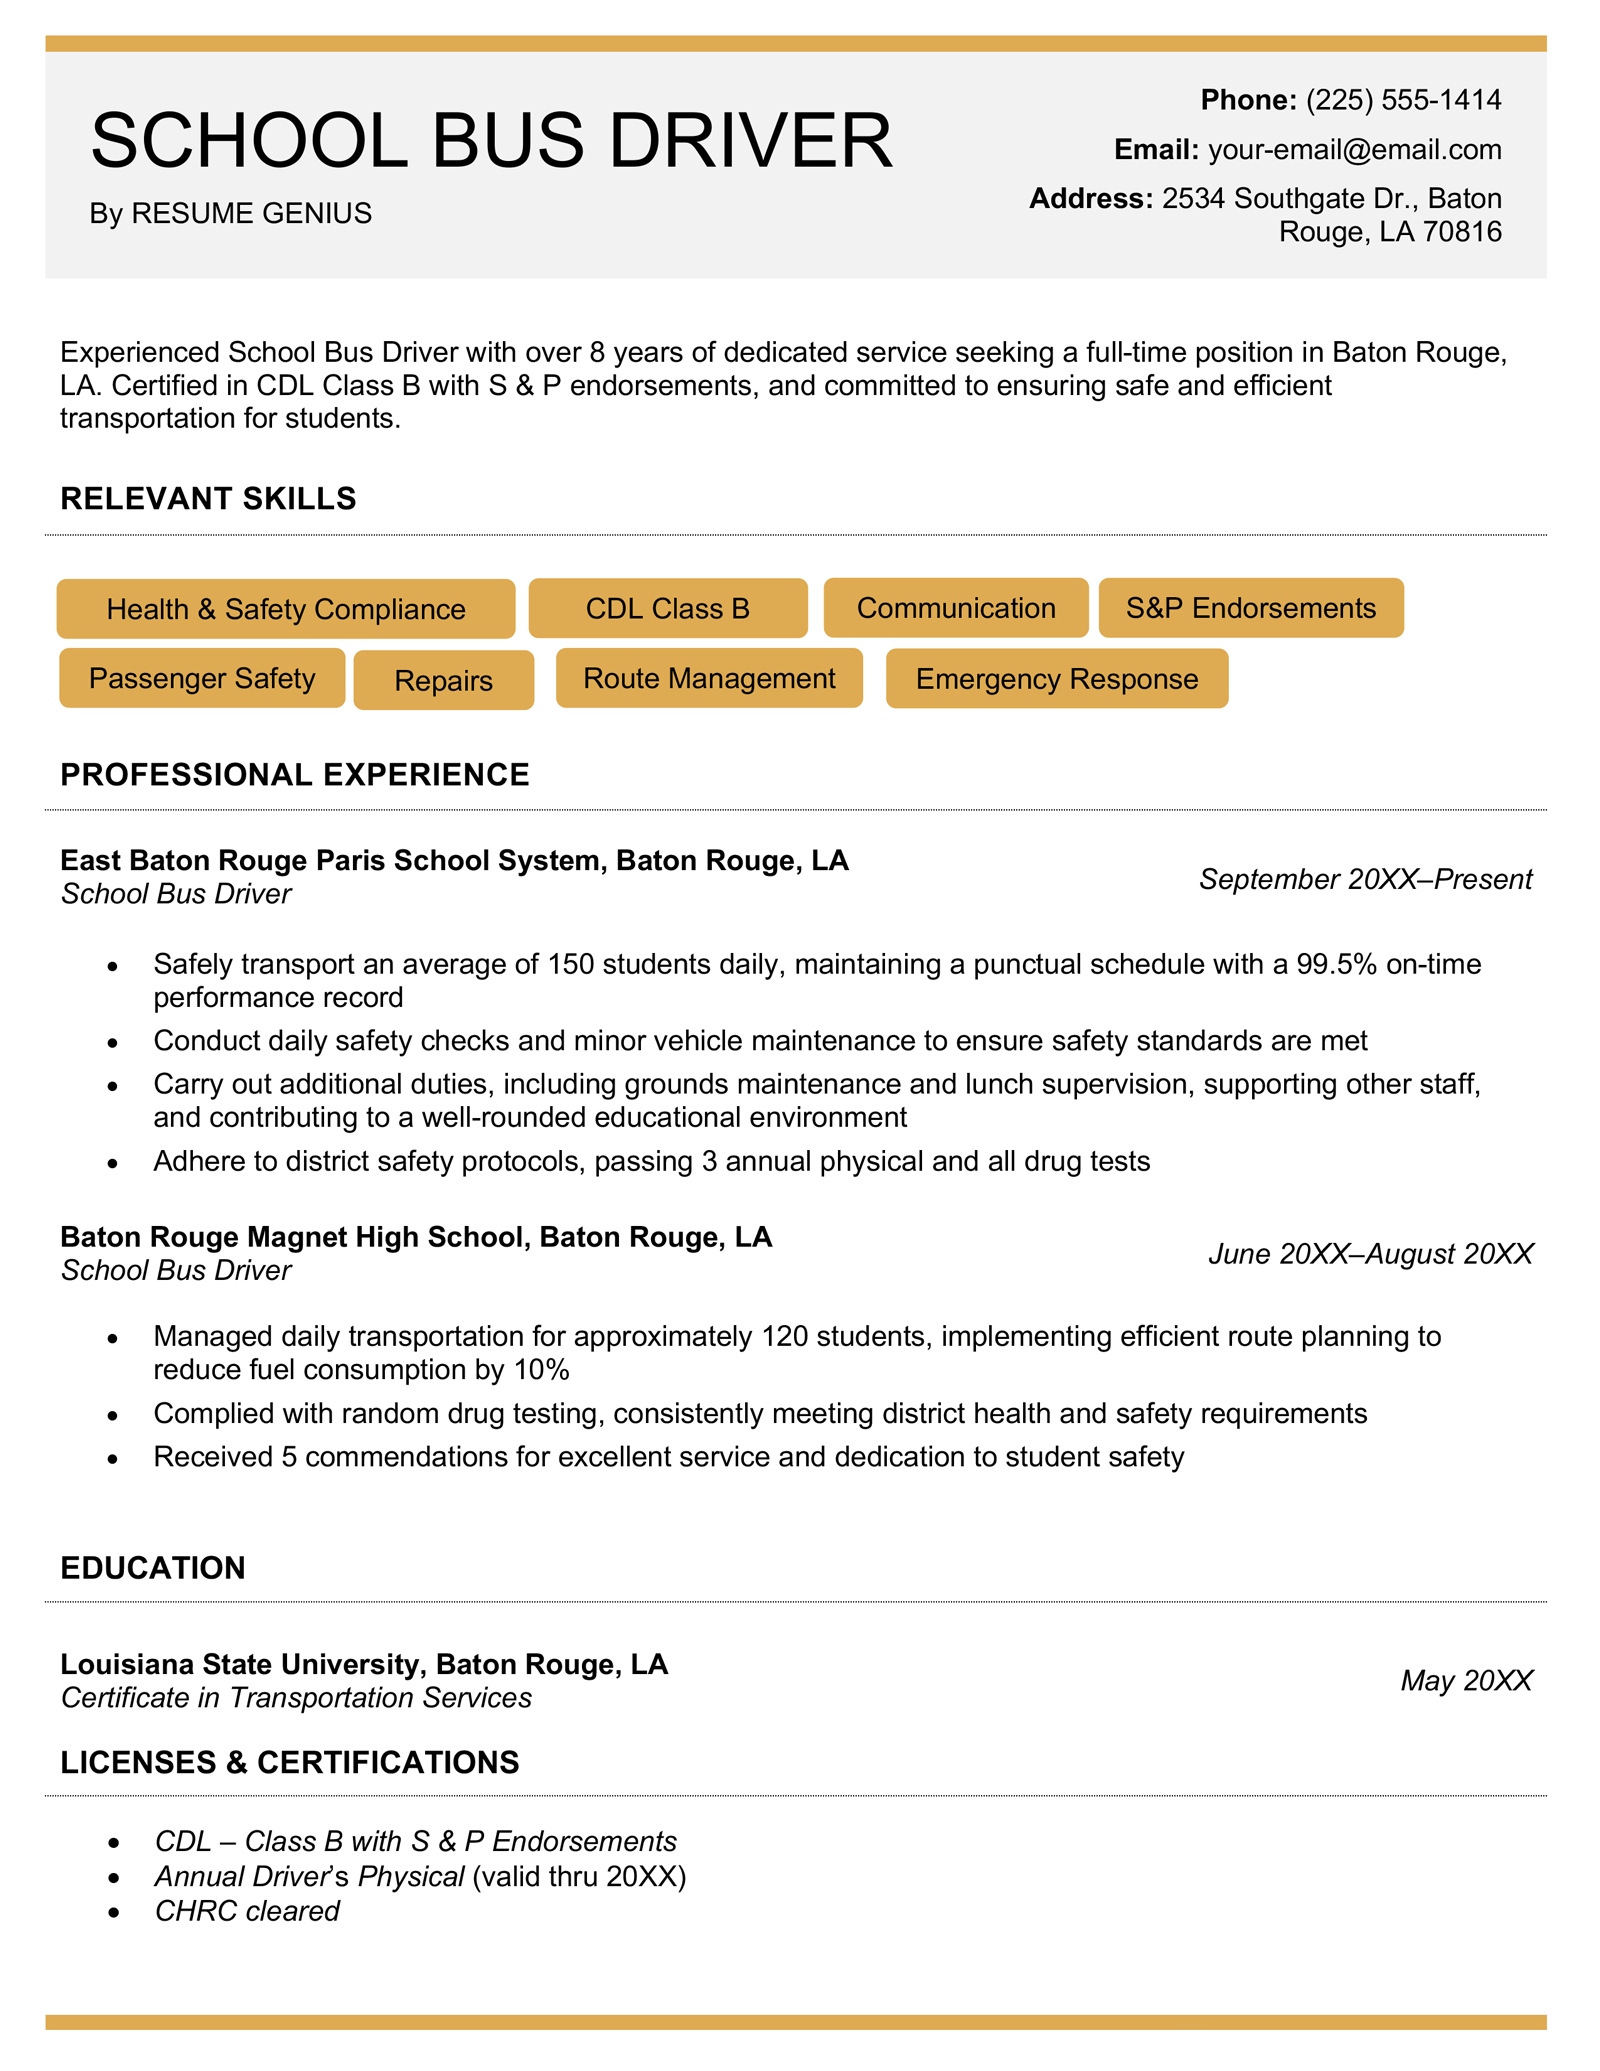 A school driver resume in yellow that uses buttons to highlight certain bus driver skills.